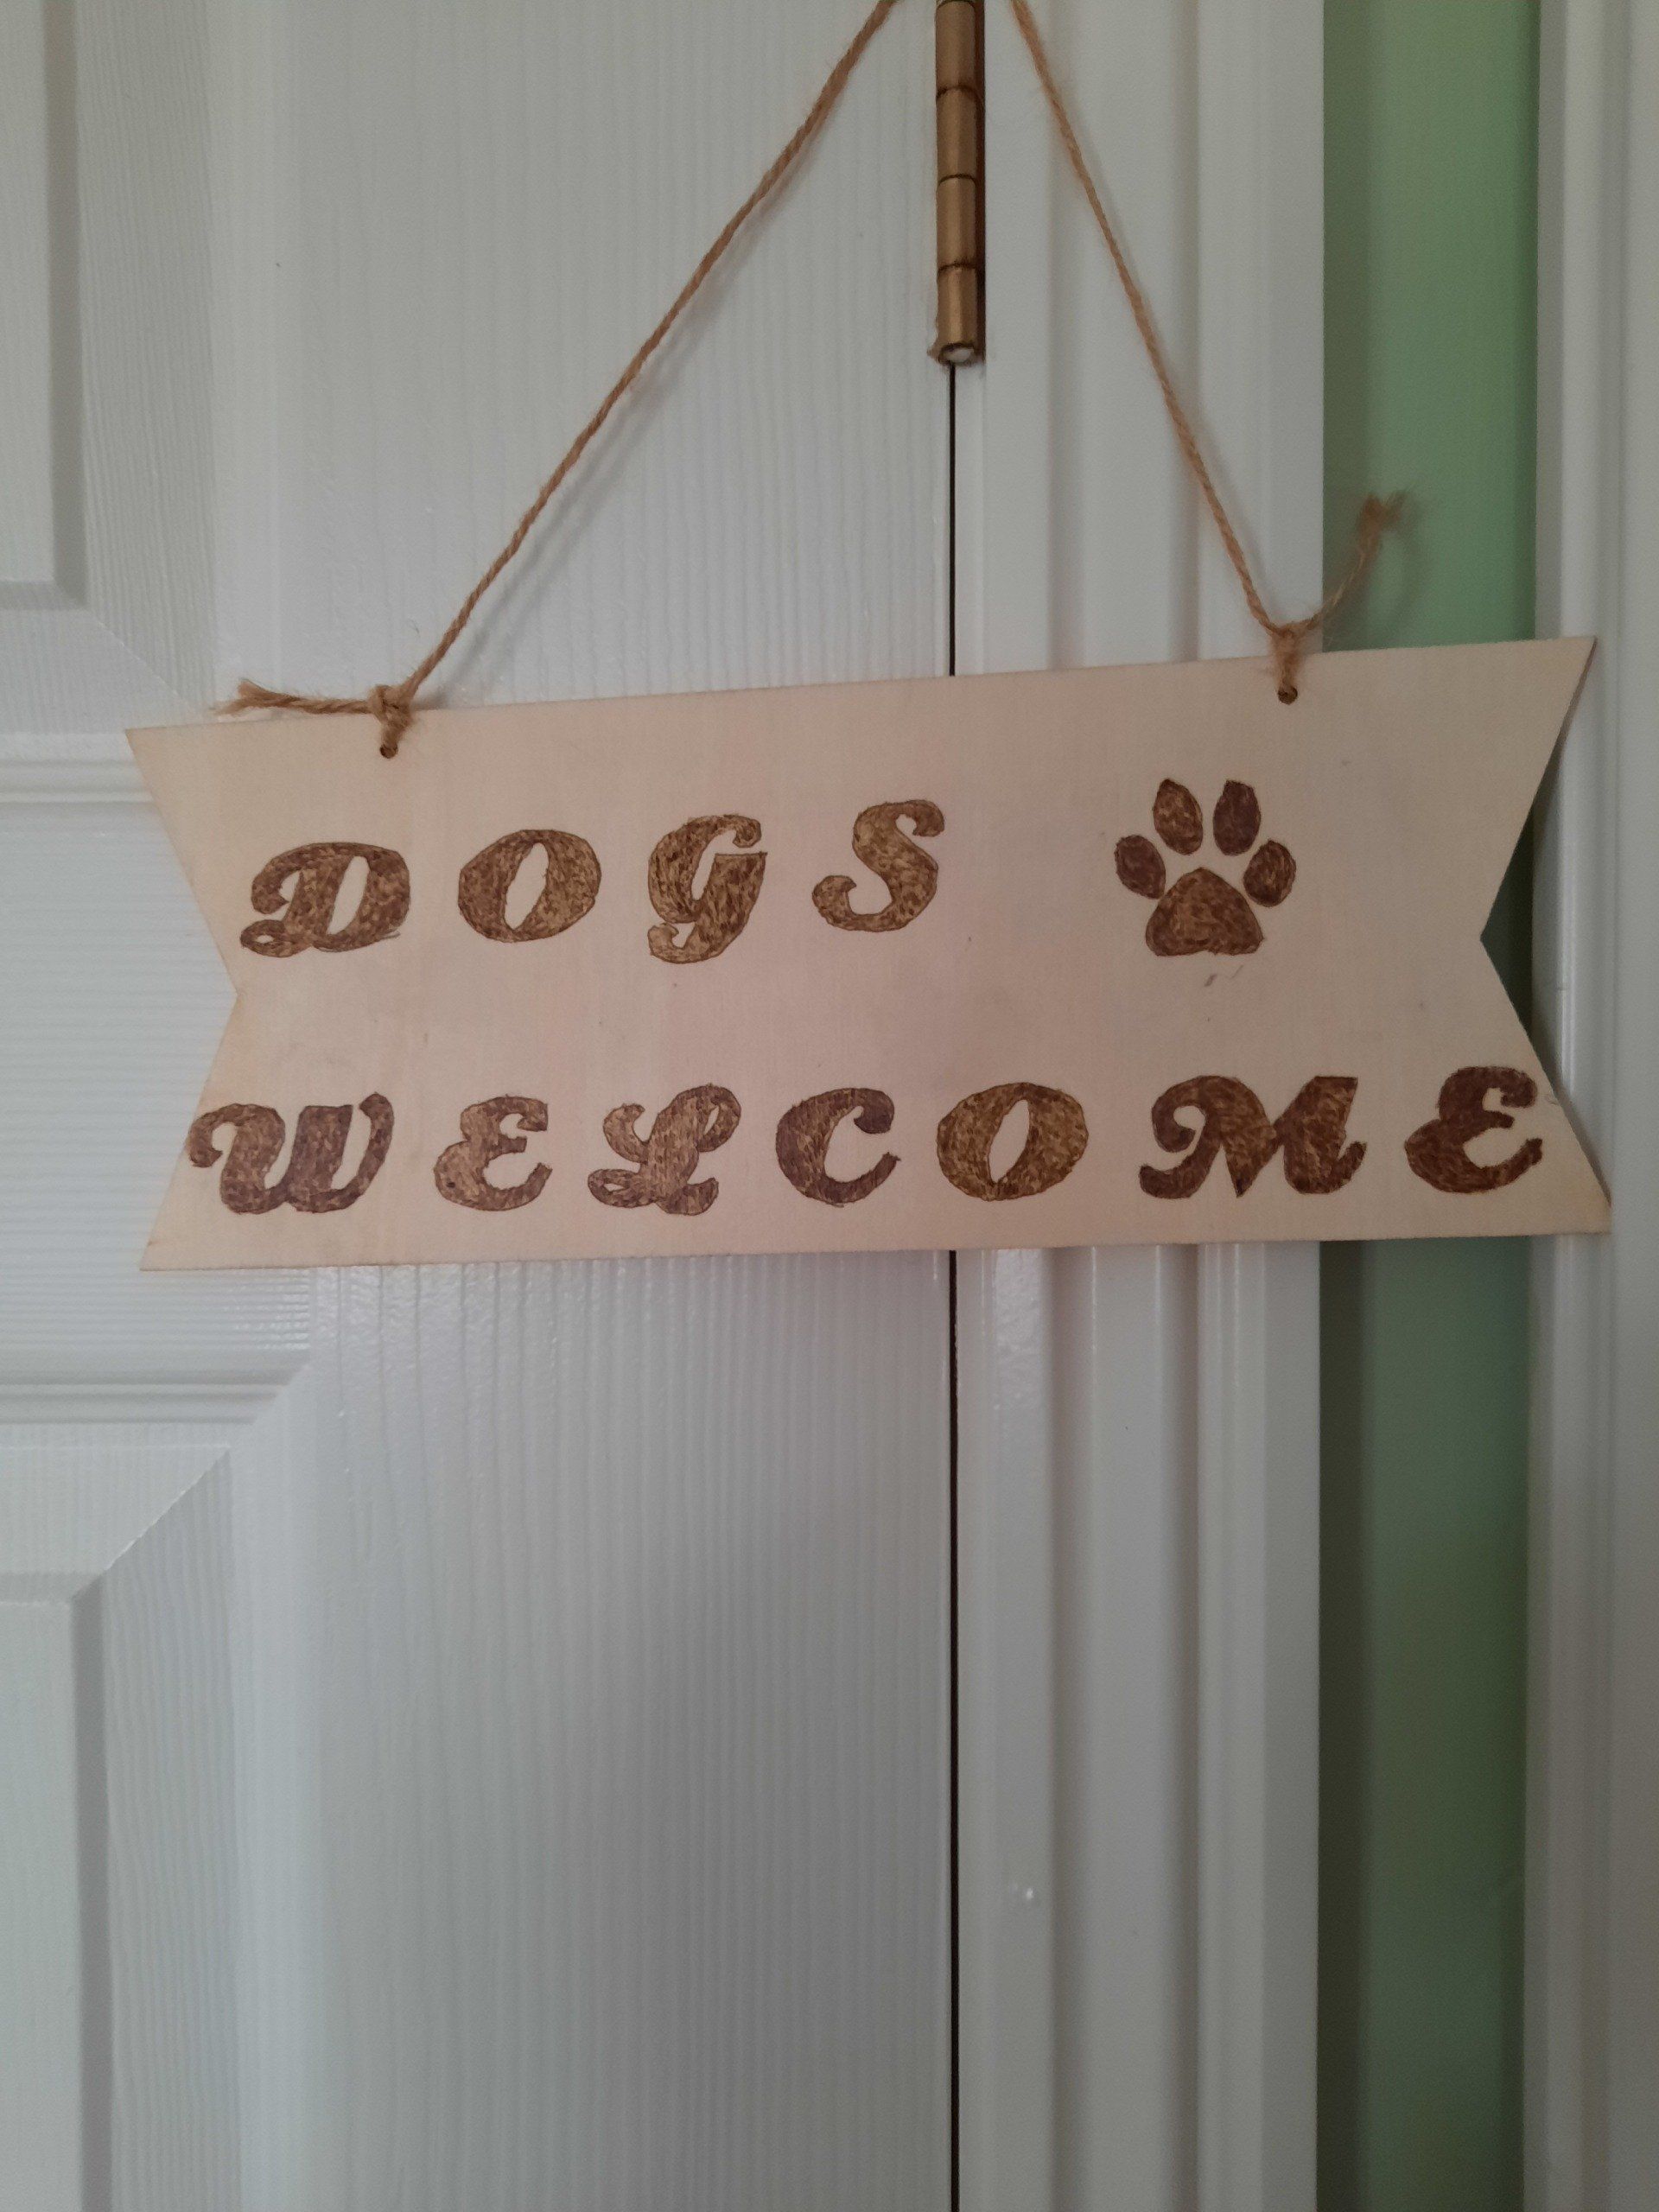 Dogs welcome - useful for b&b, home & pubs, hotels